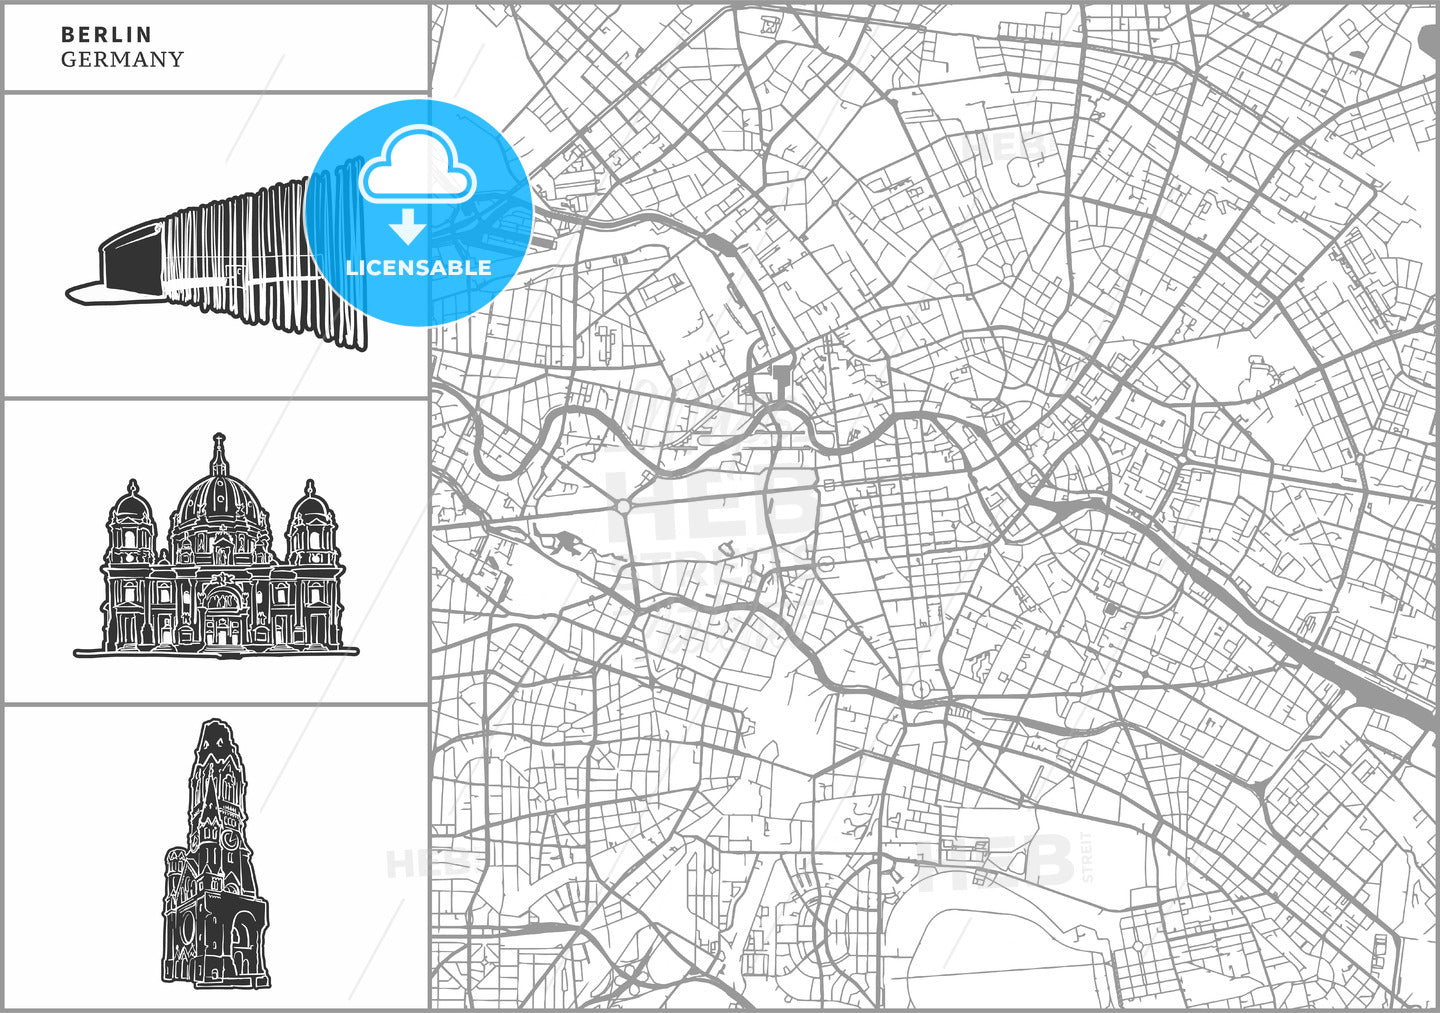 Berlin city map with hand-drawn architecture icons